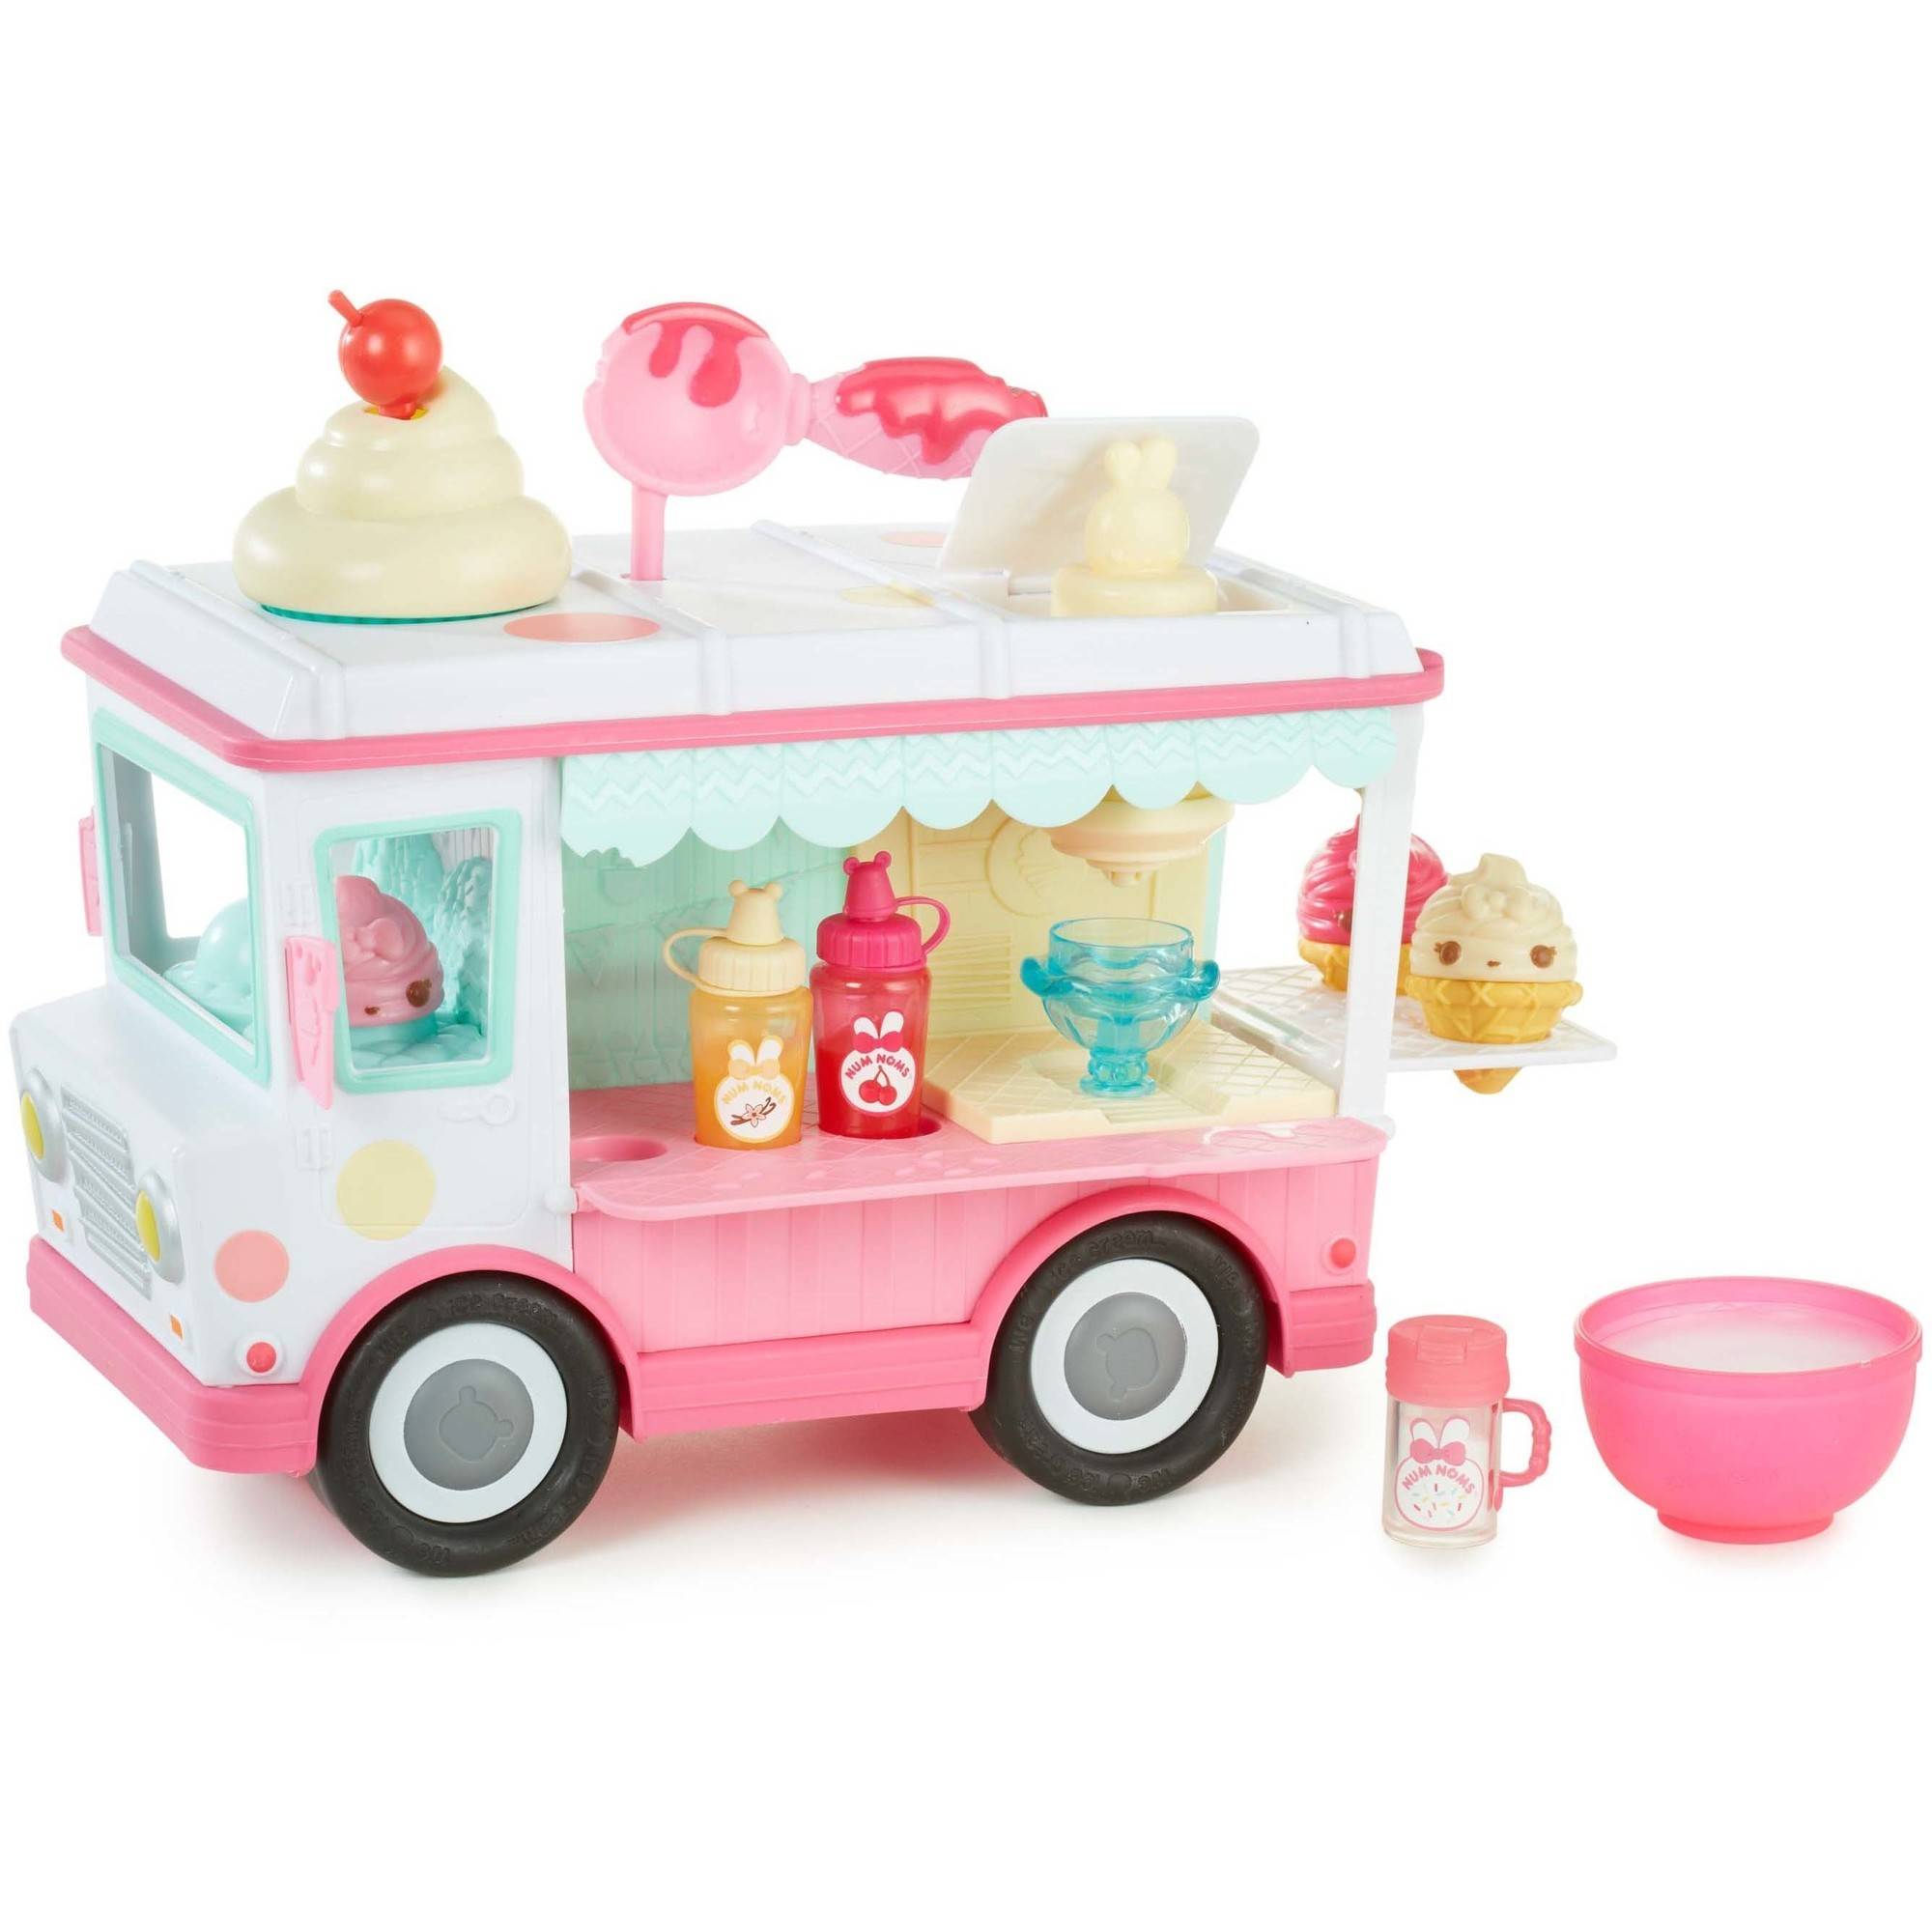 Num Noms Lipgloss Truck Craft Kit - image 1 of 4